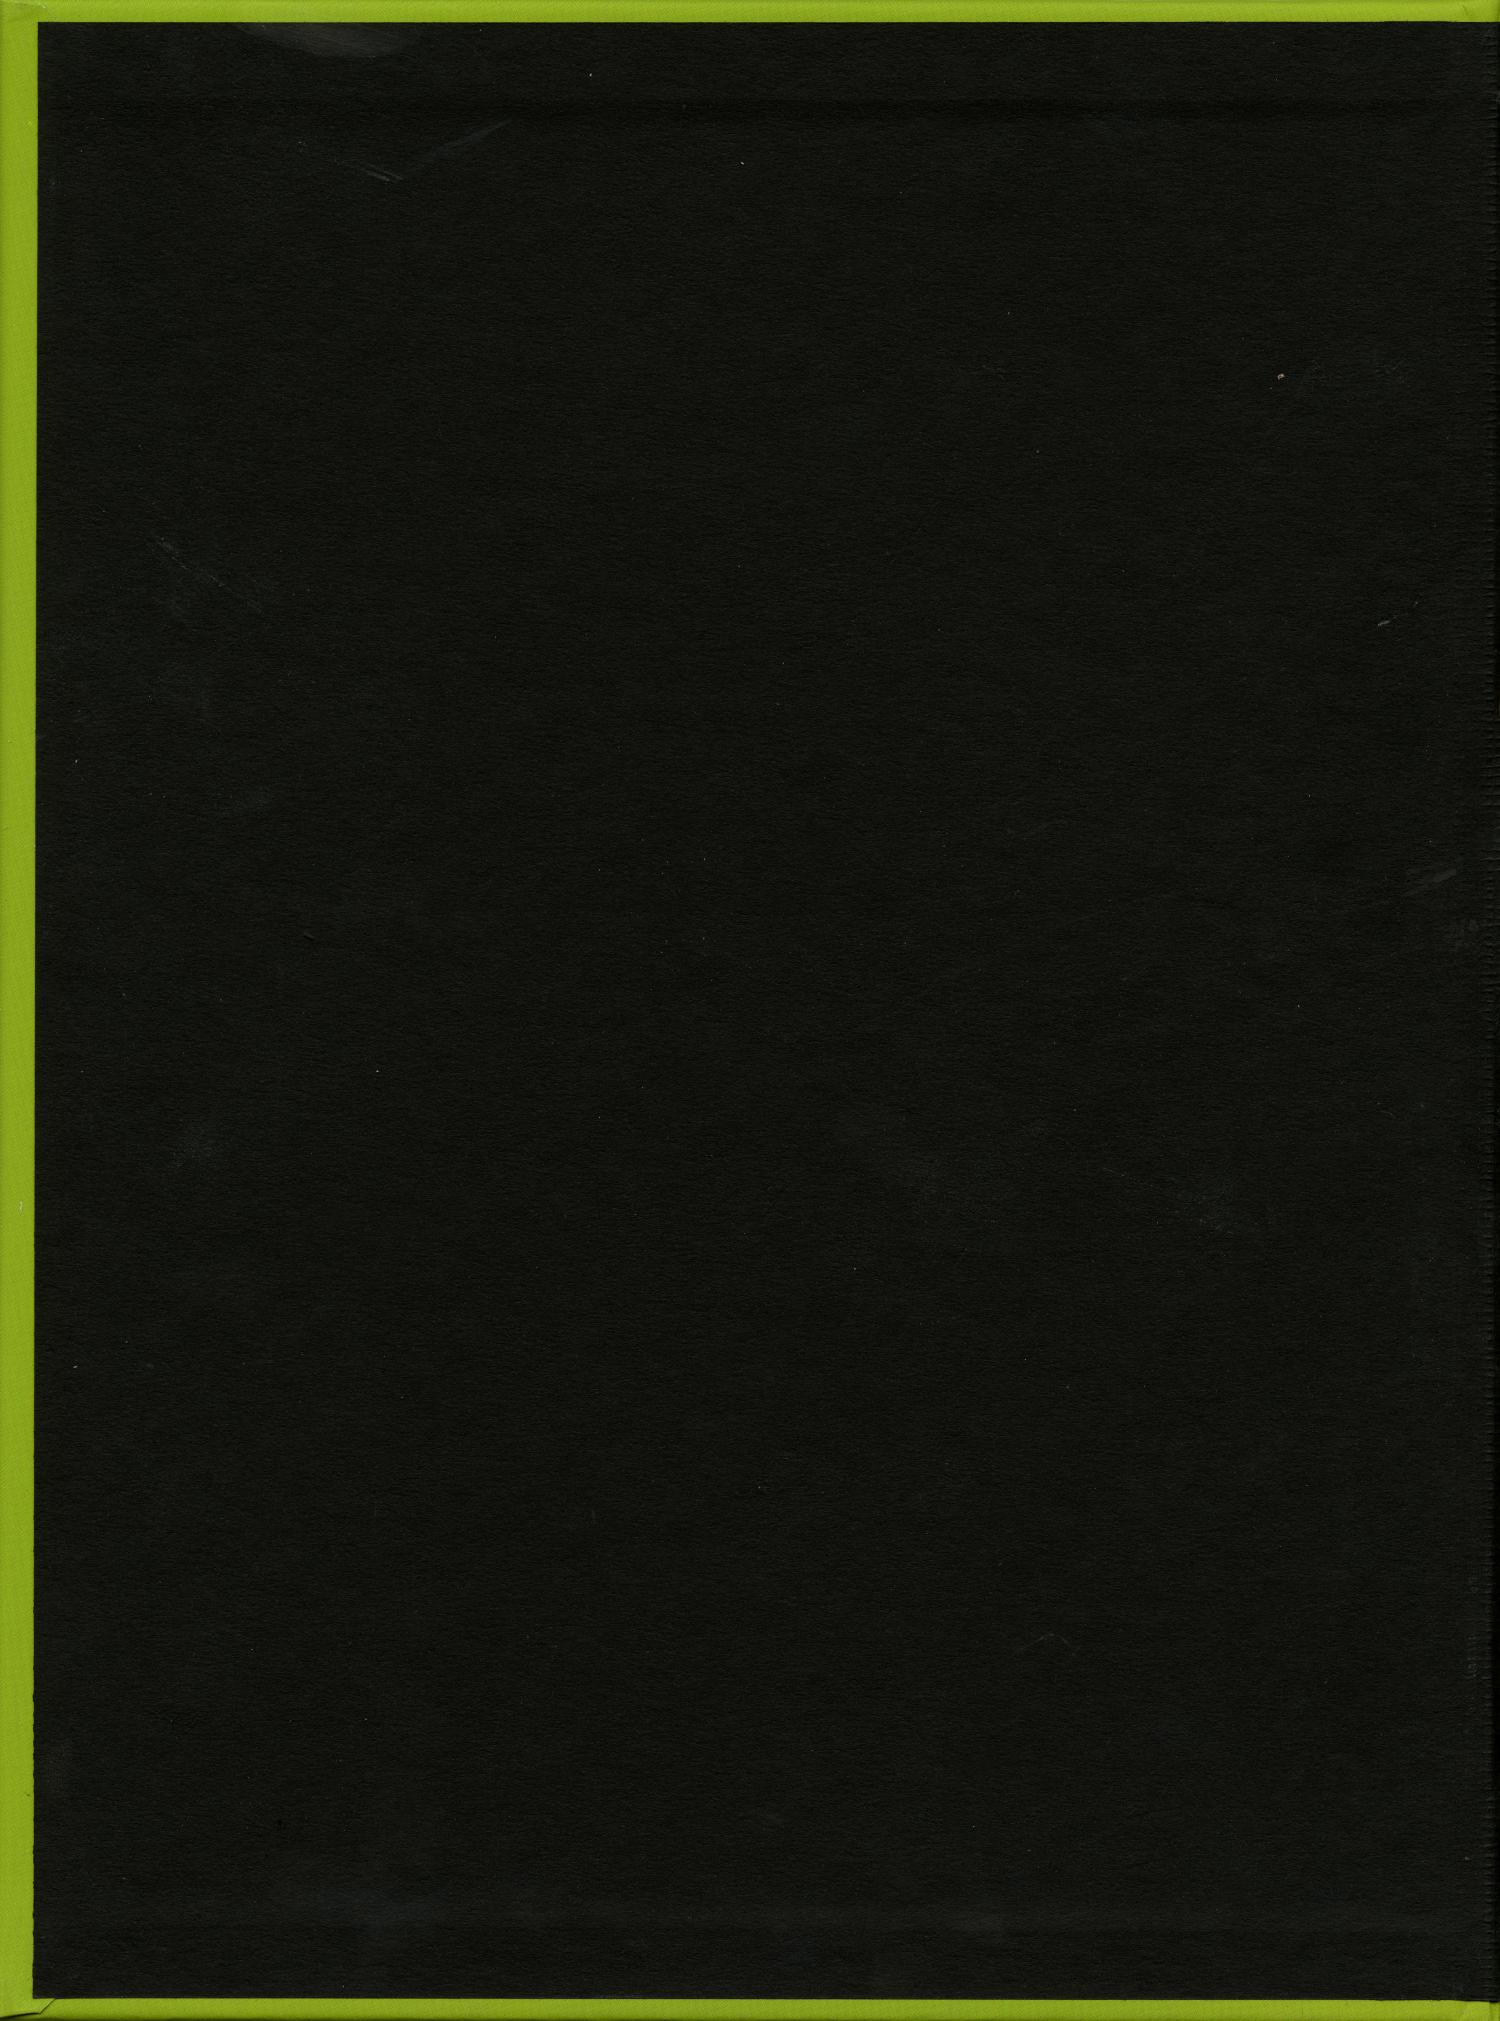 The Grassburr, Yearbook of Tarleton State University, 2012
                                                
                                                    Front Inside
                                                